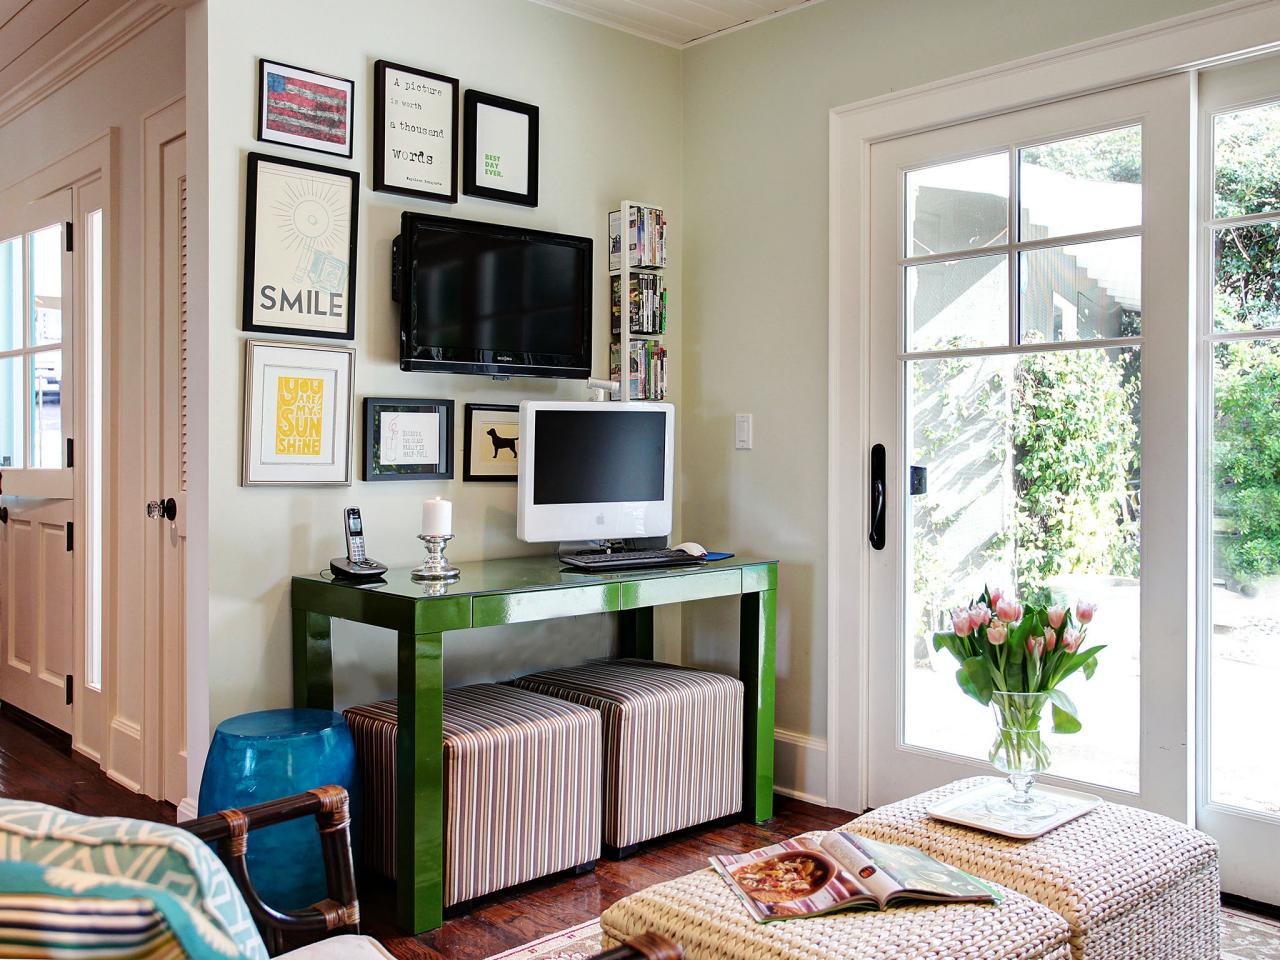 Small Space Home Office Ideas | HGTV's Decorating & Design ...